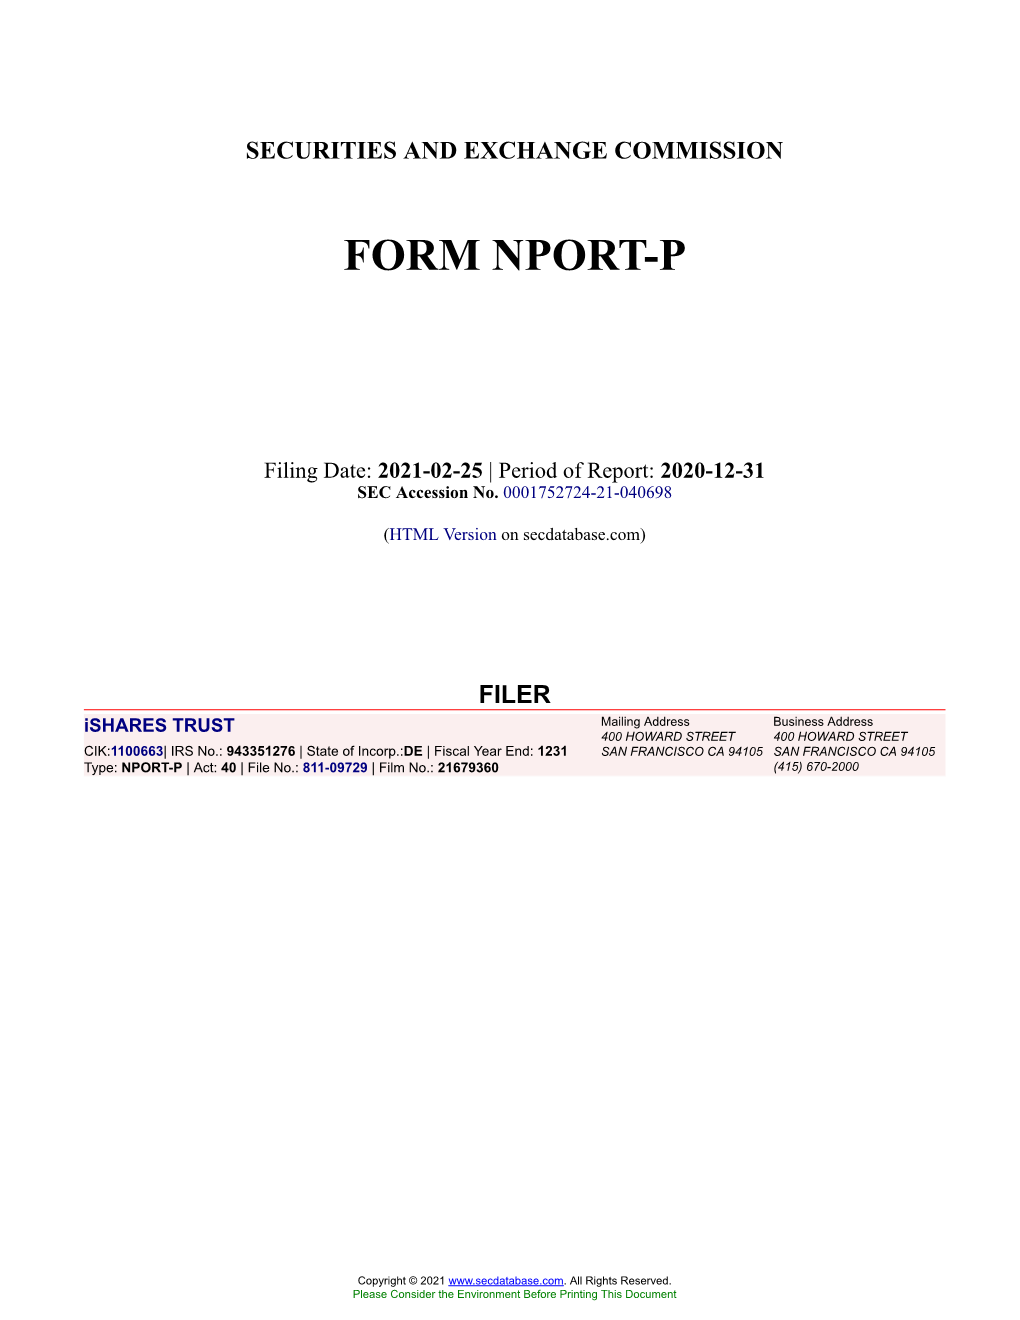 Ishares TRUST Form NPORT-P Filed 2021-02-25